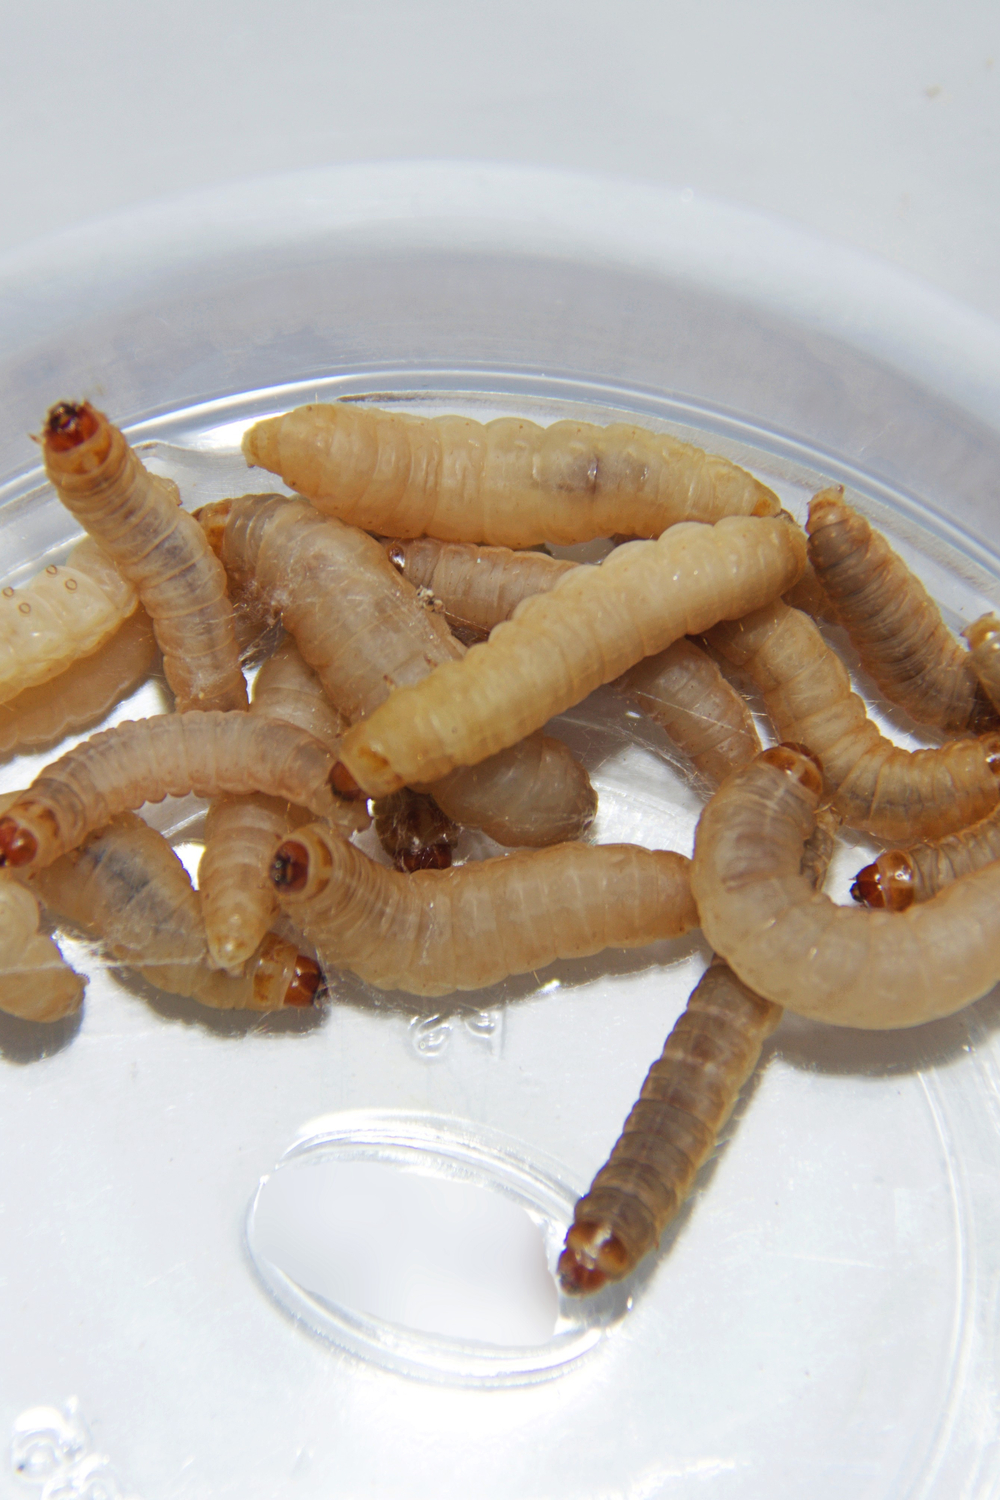 The harm of Wax Worms